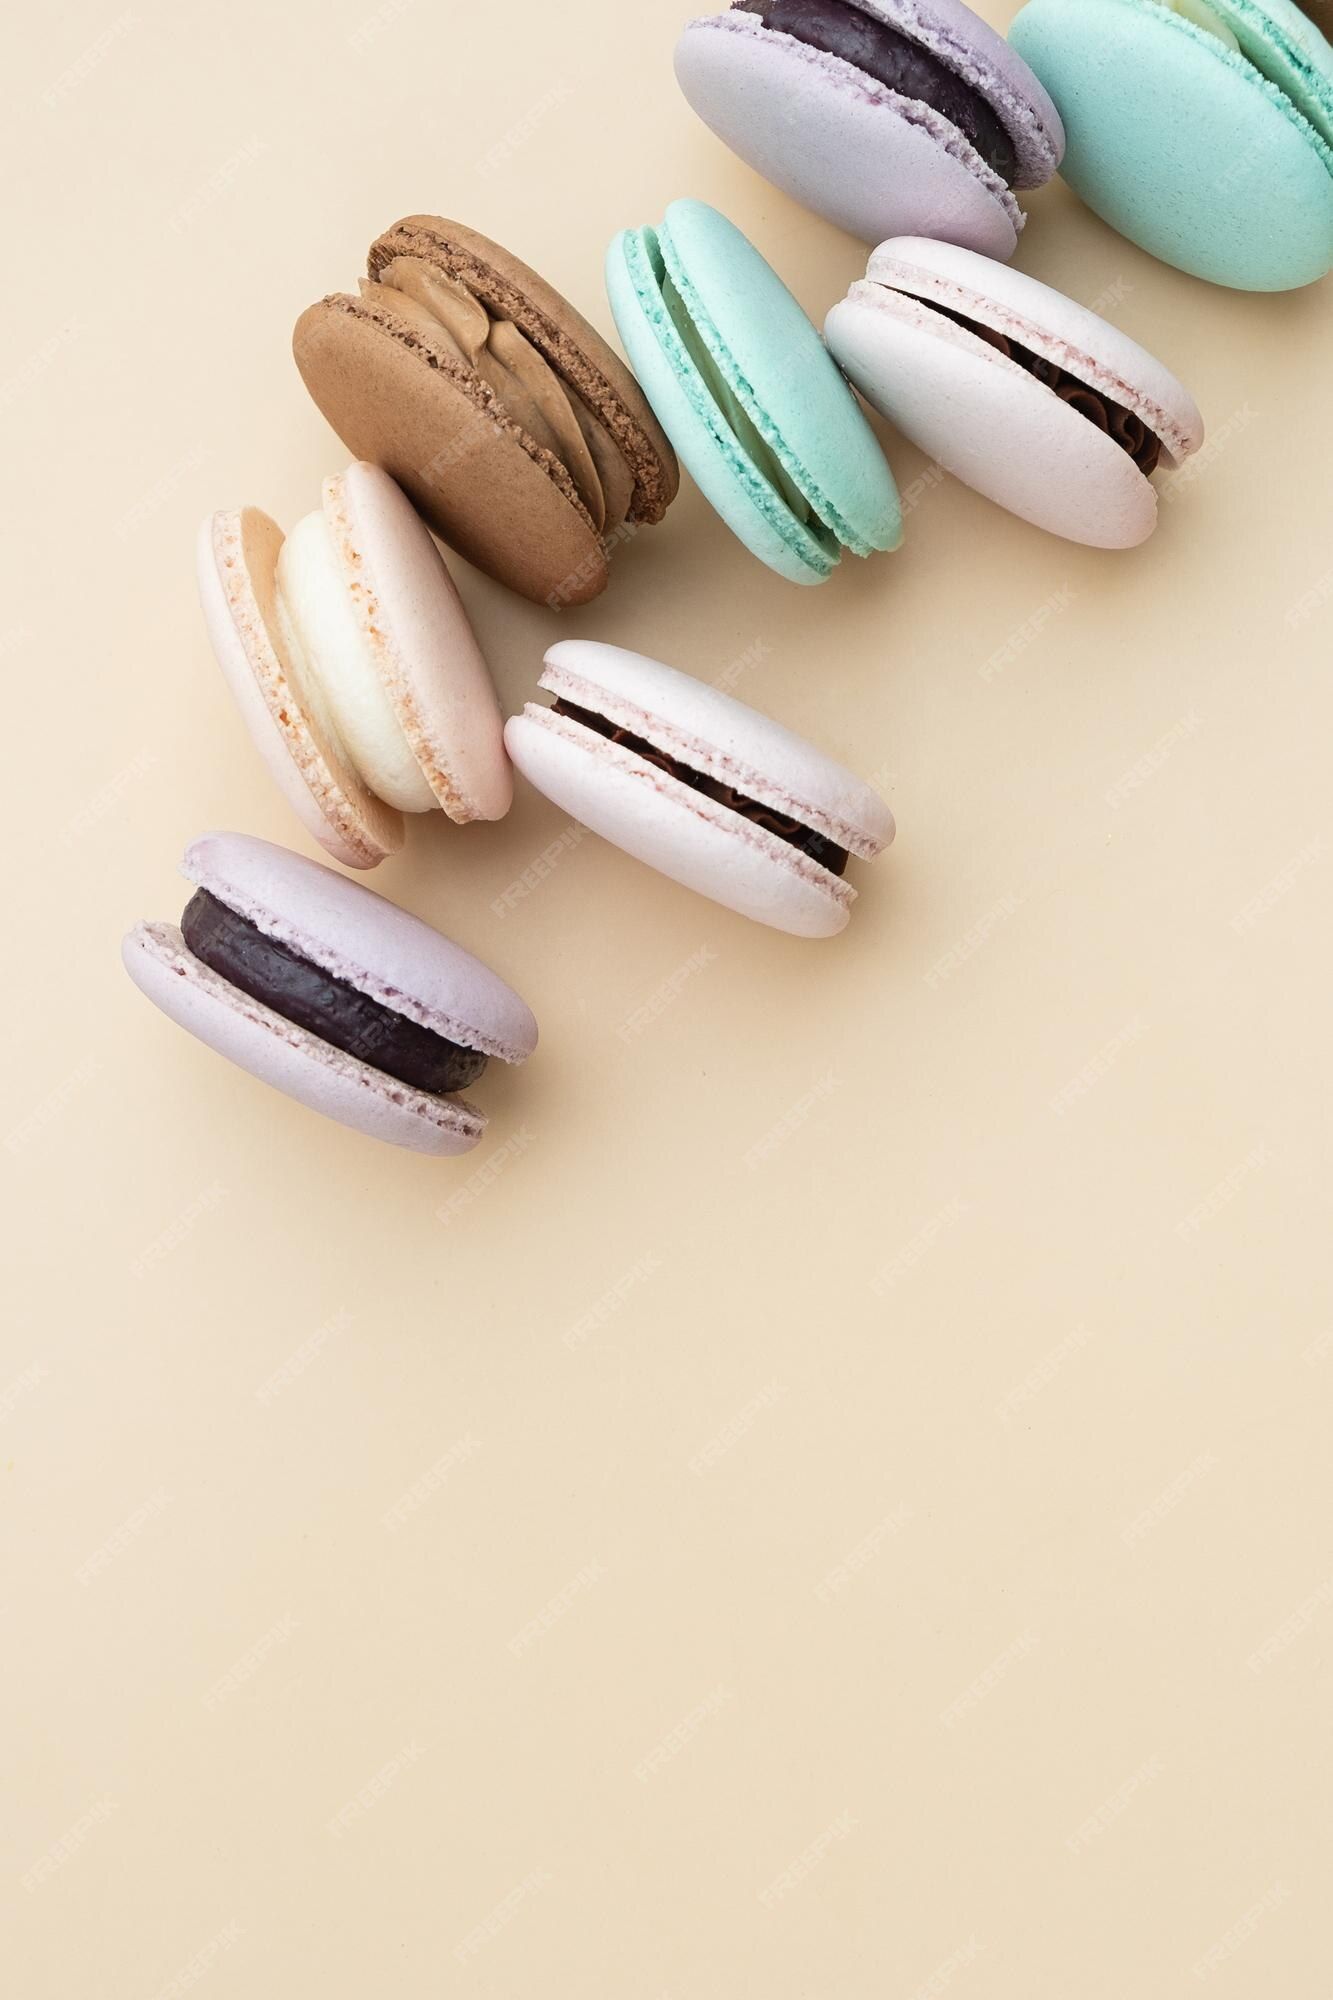 Premium Photo. Different pastel colors pastry macarons top view on a beige background with copy space